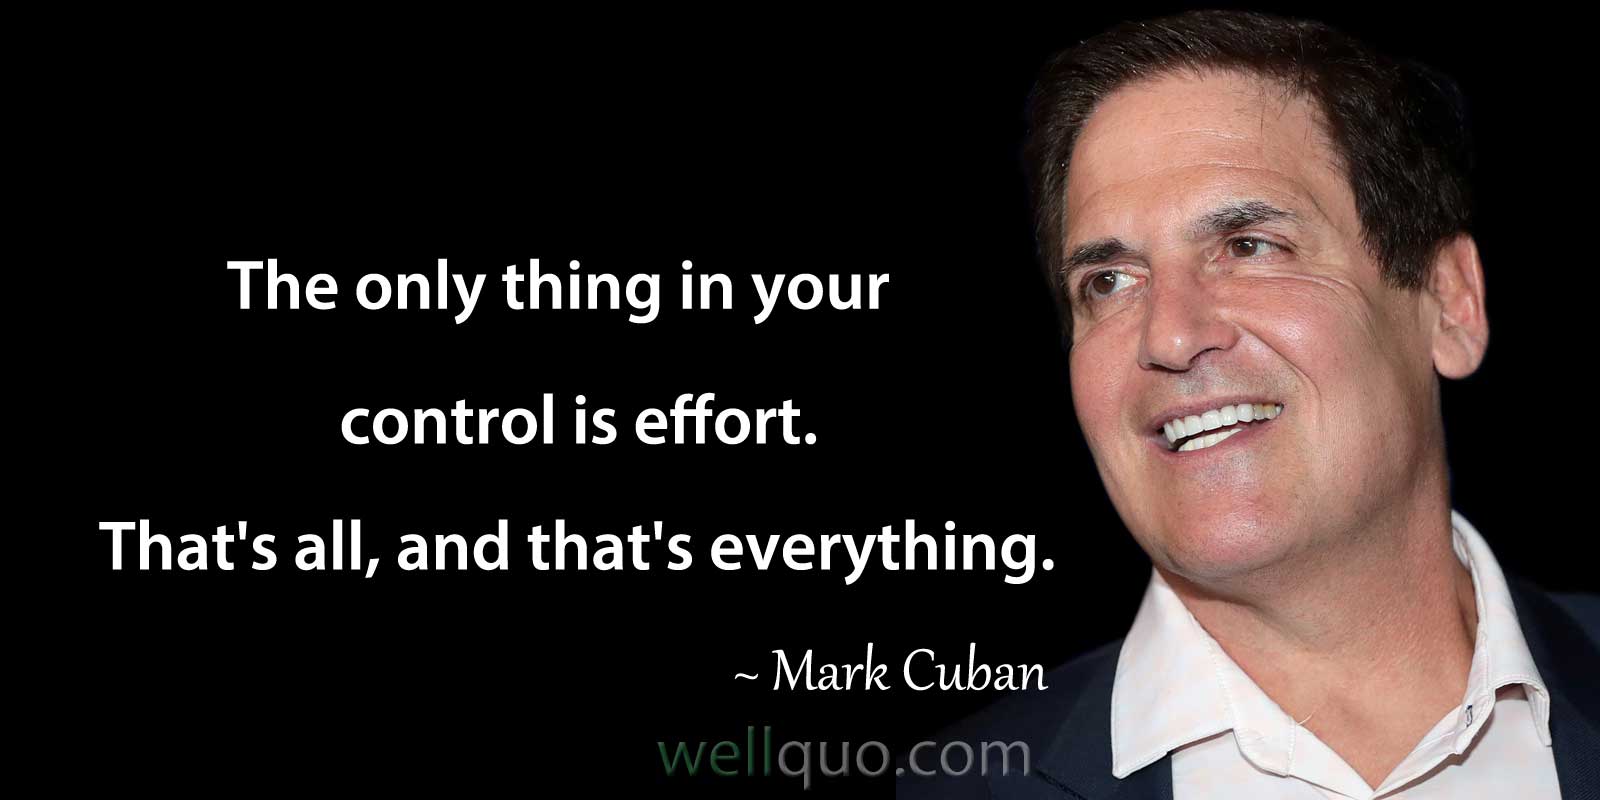 Mark Cuban Quotes - The only thing in your control is effort. That's all, and that's everything.